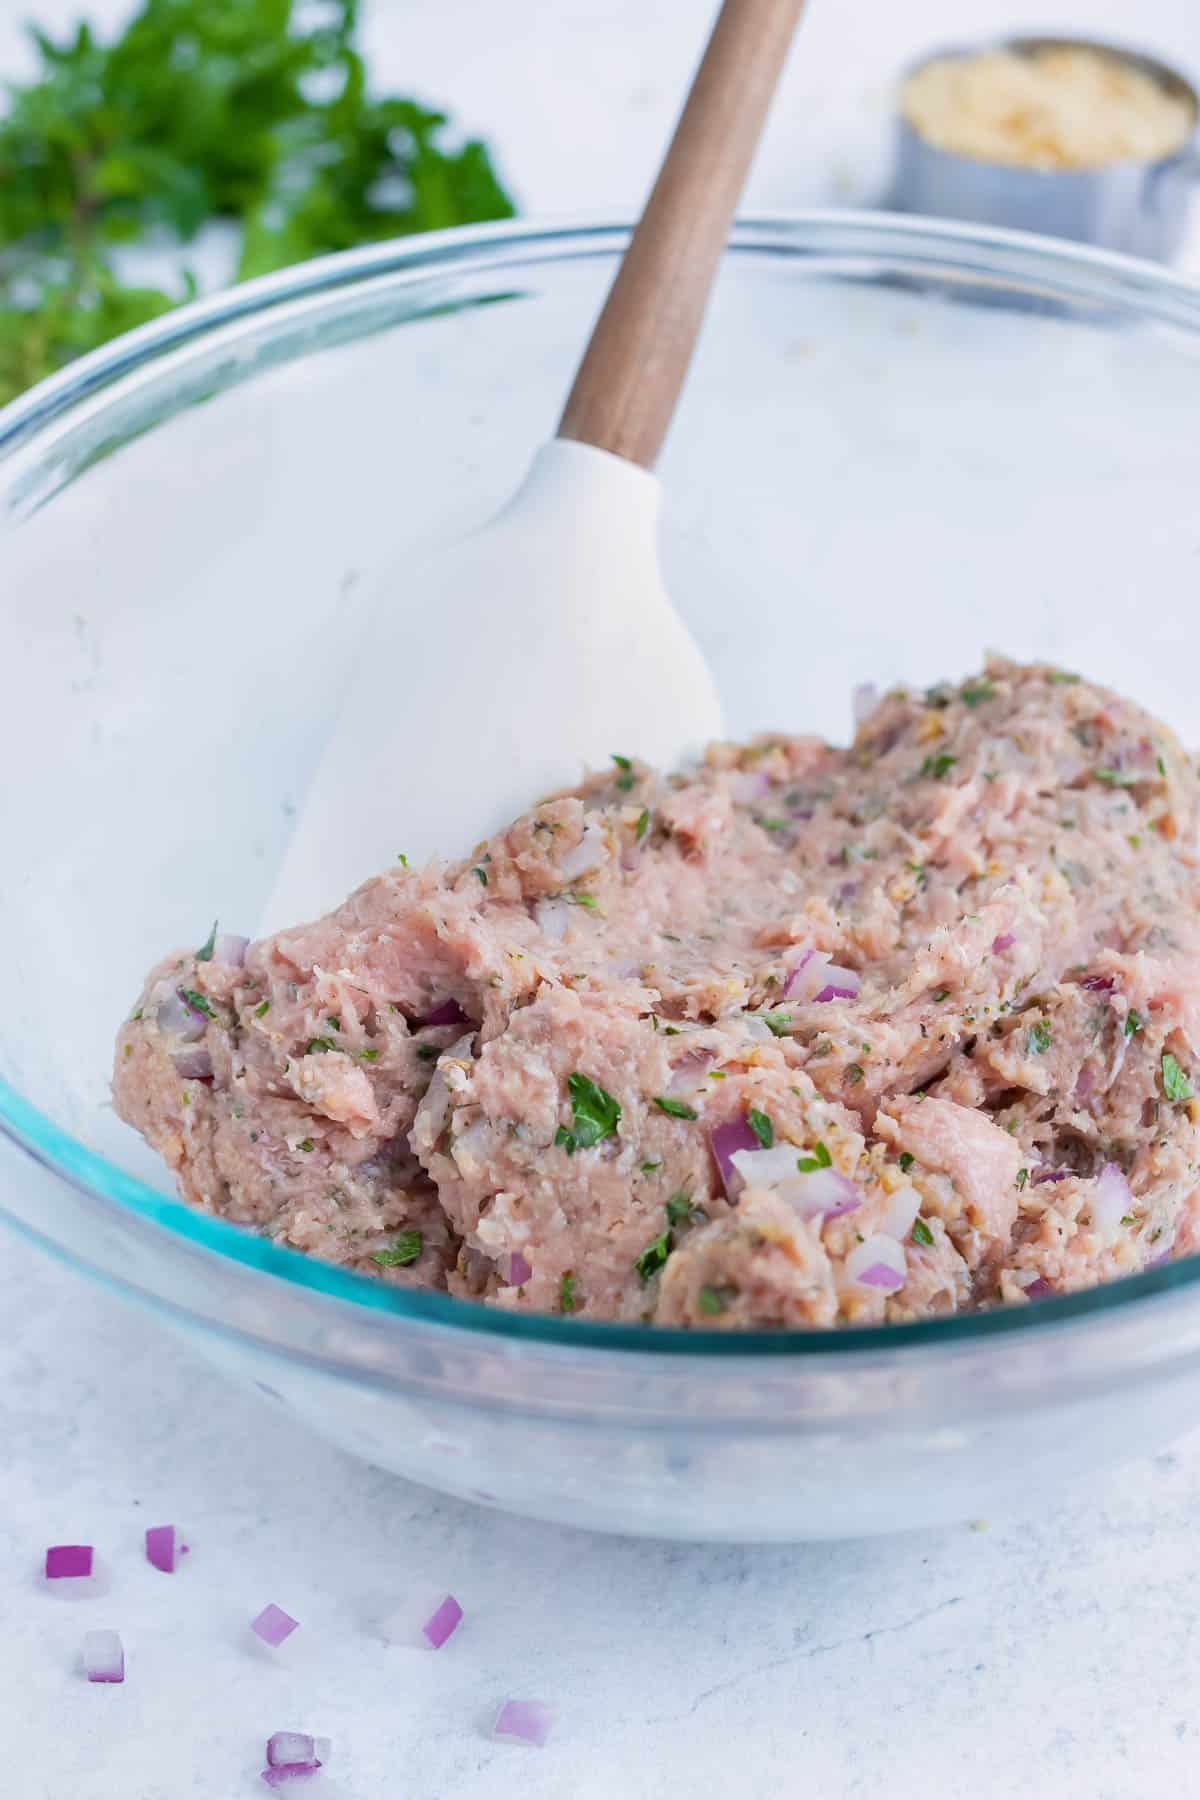 A spatula mixes ground turkey and other ingredients in this easy, low-carb, gluten-free meatball recipe.